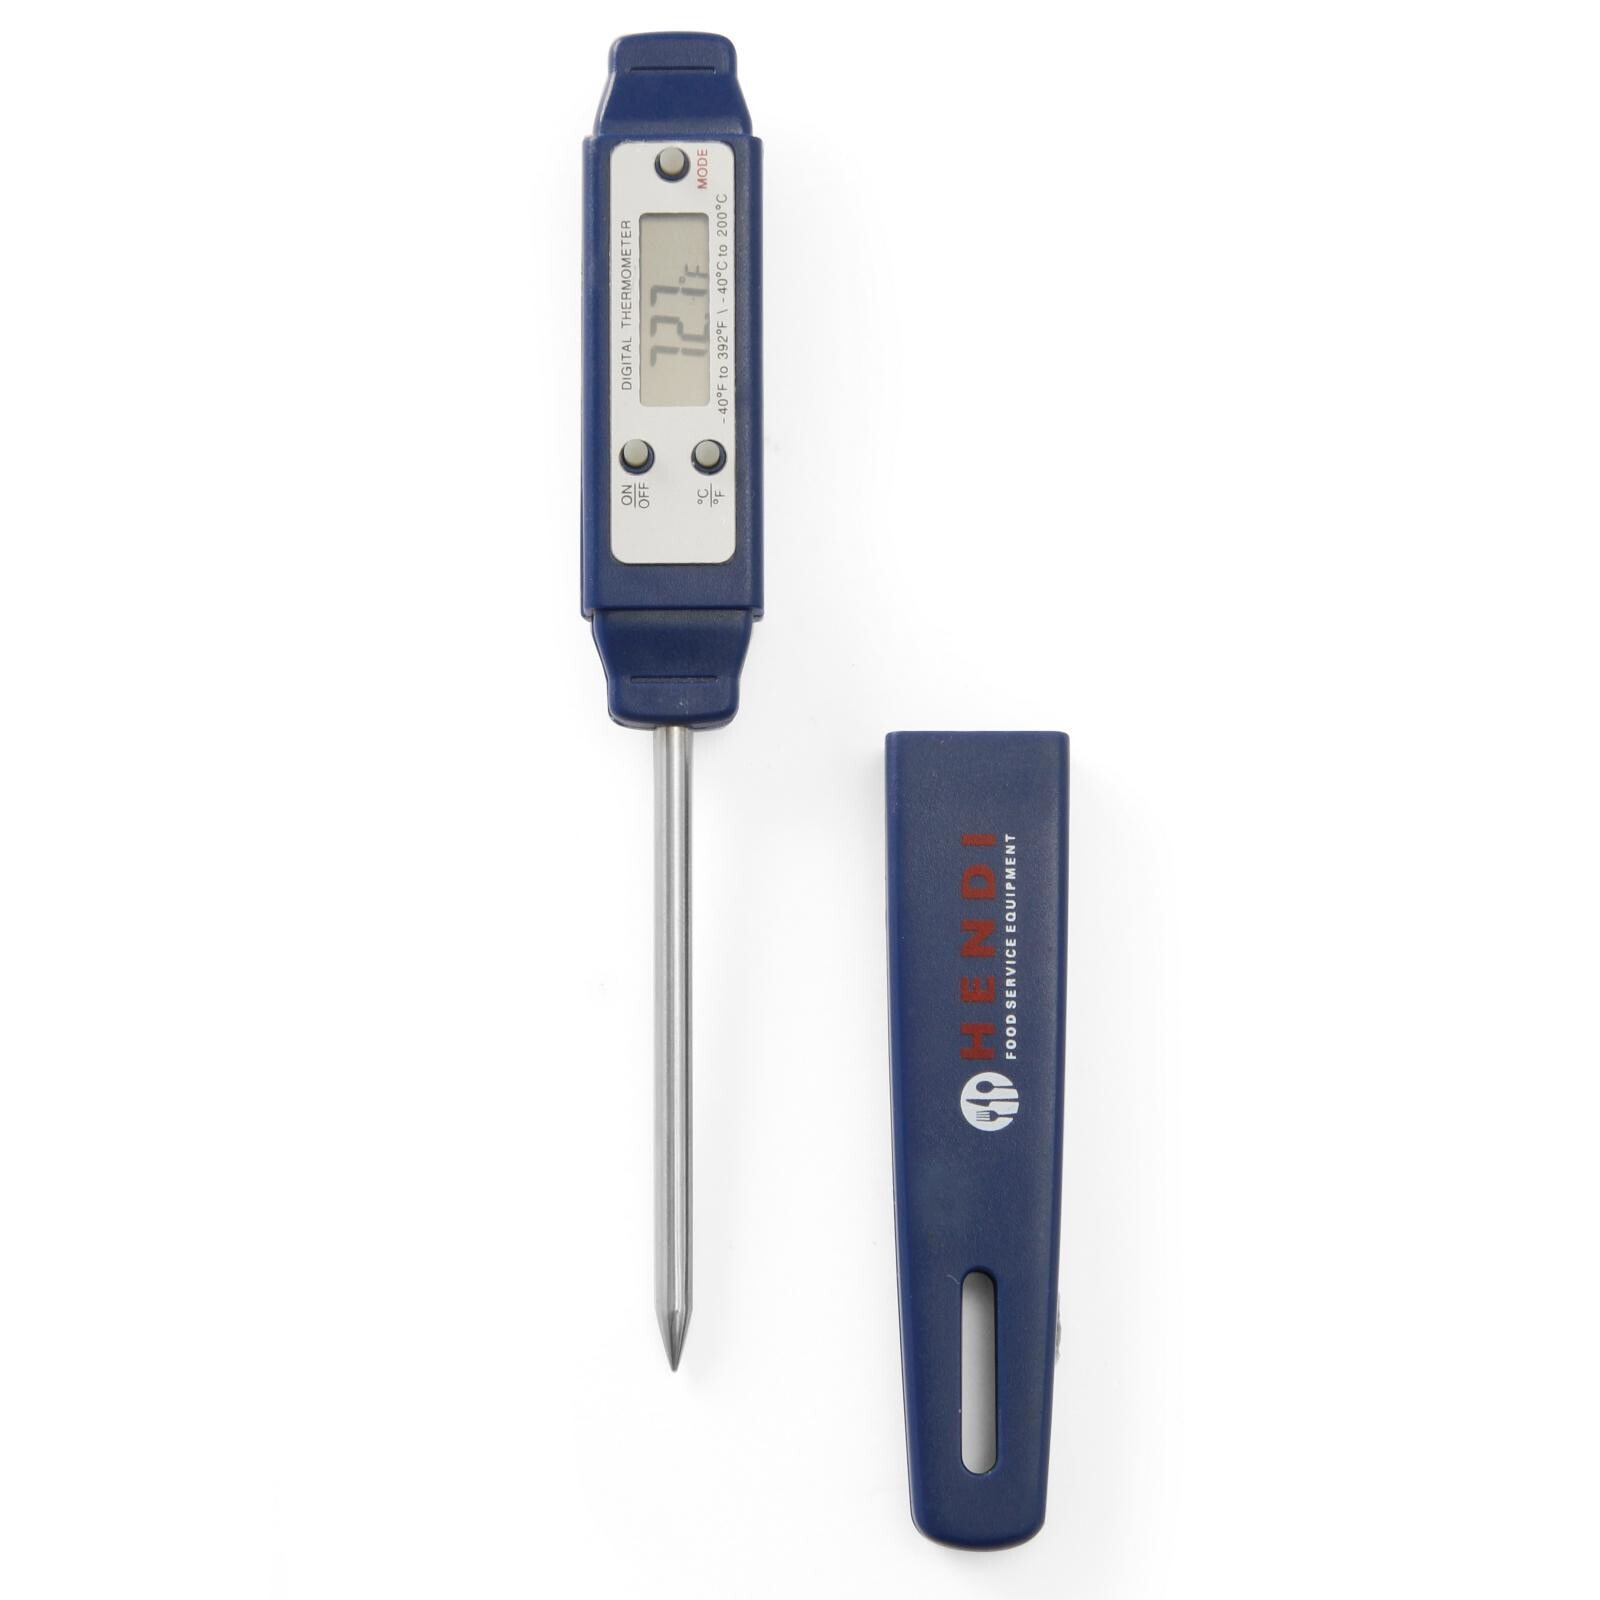 Digital gastronomic thermometer with a probe - Hendi 271209